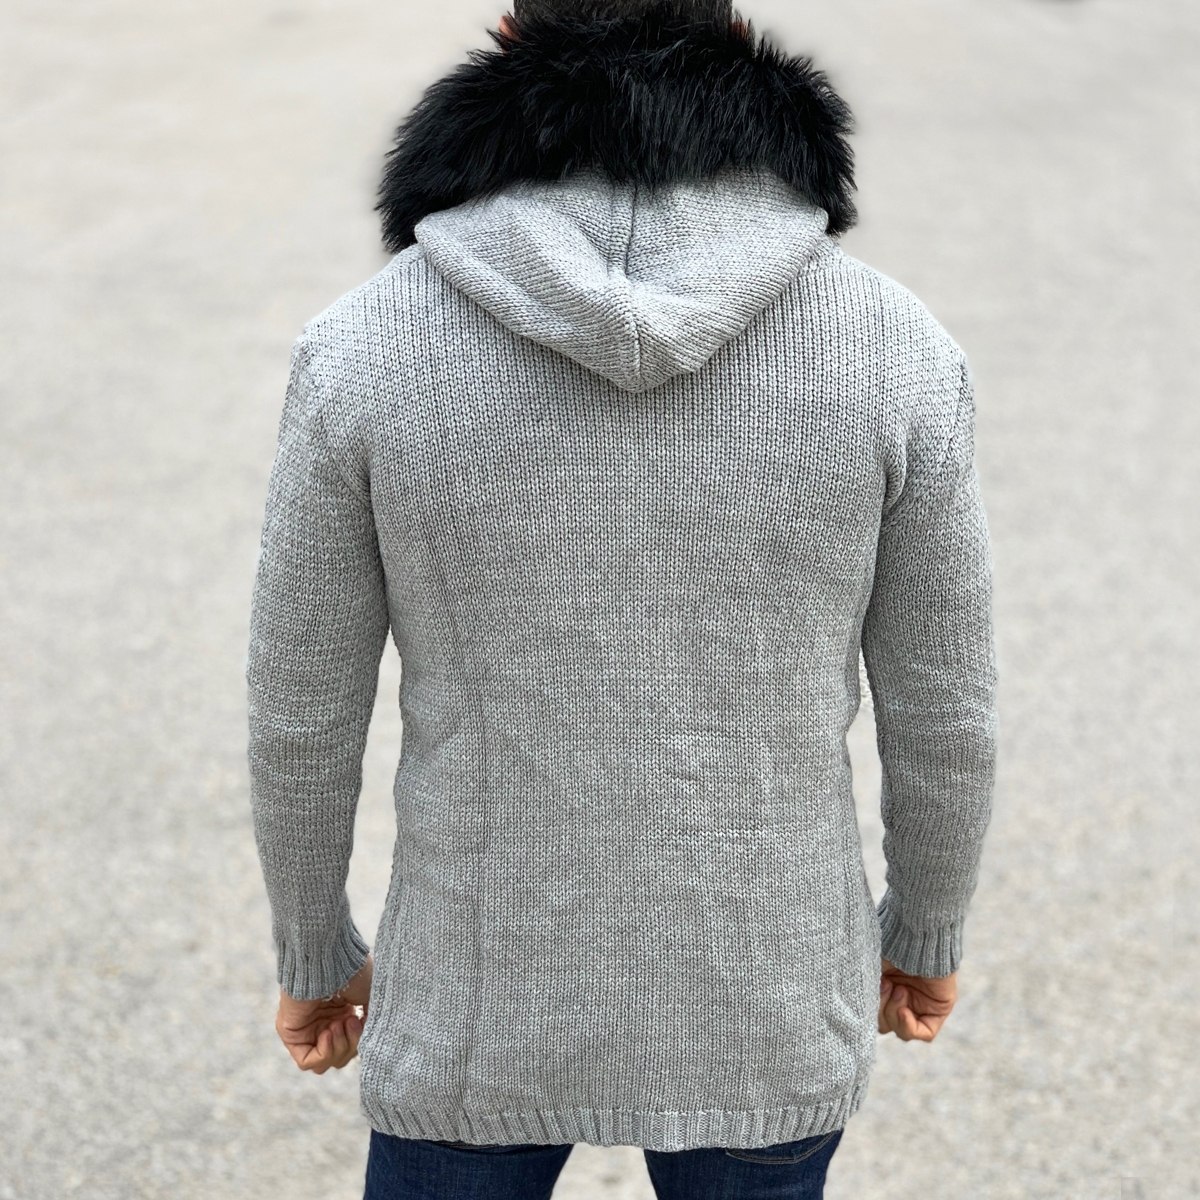 Cardigan Hoodie with Furry Hood and Worn Design in Grey - 5